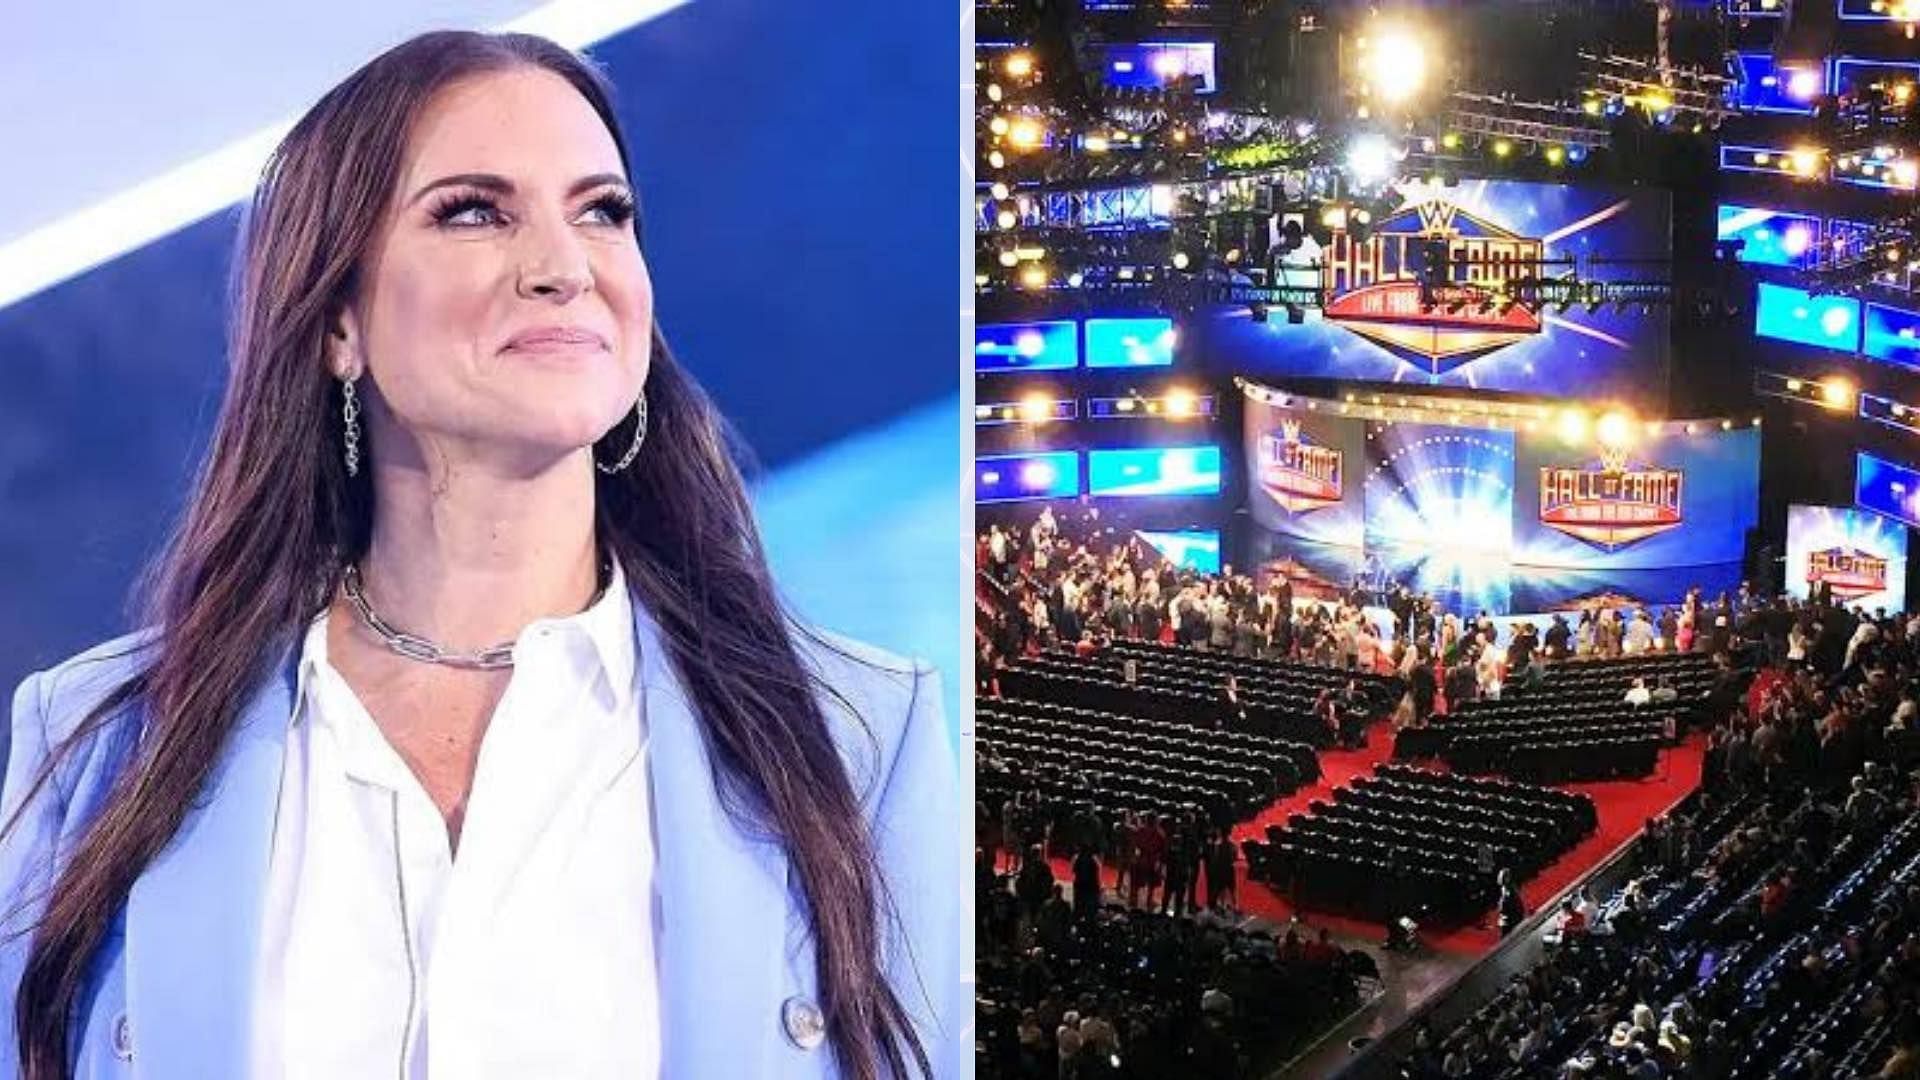 There are several female stars of the past who could join the WWE Hall of Fame